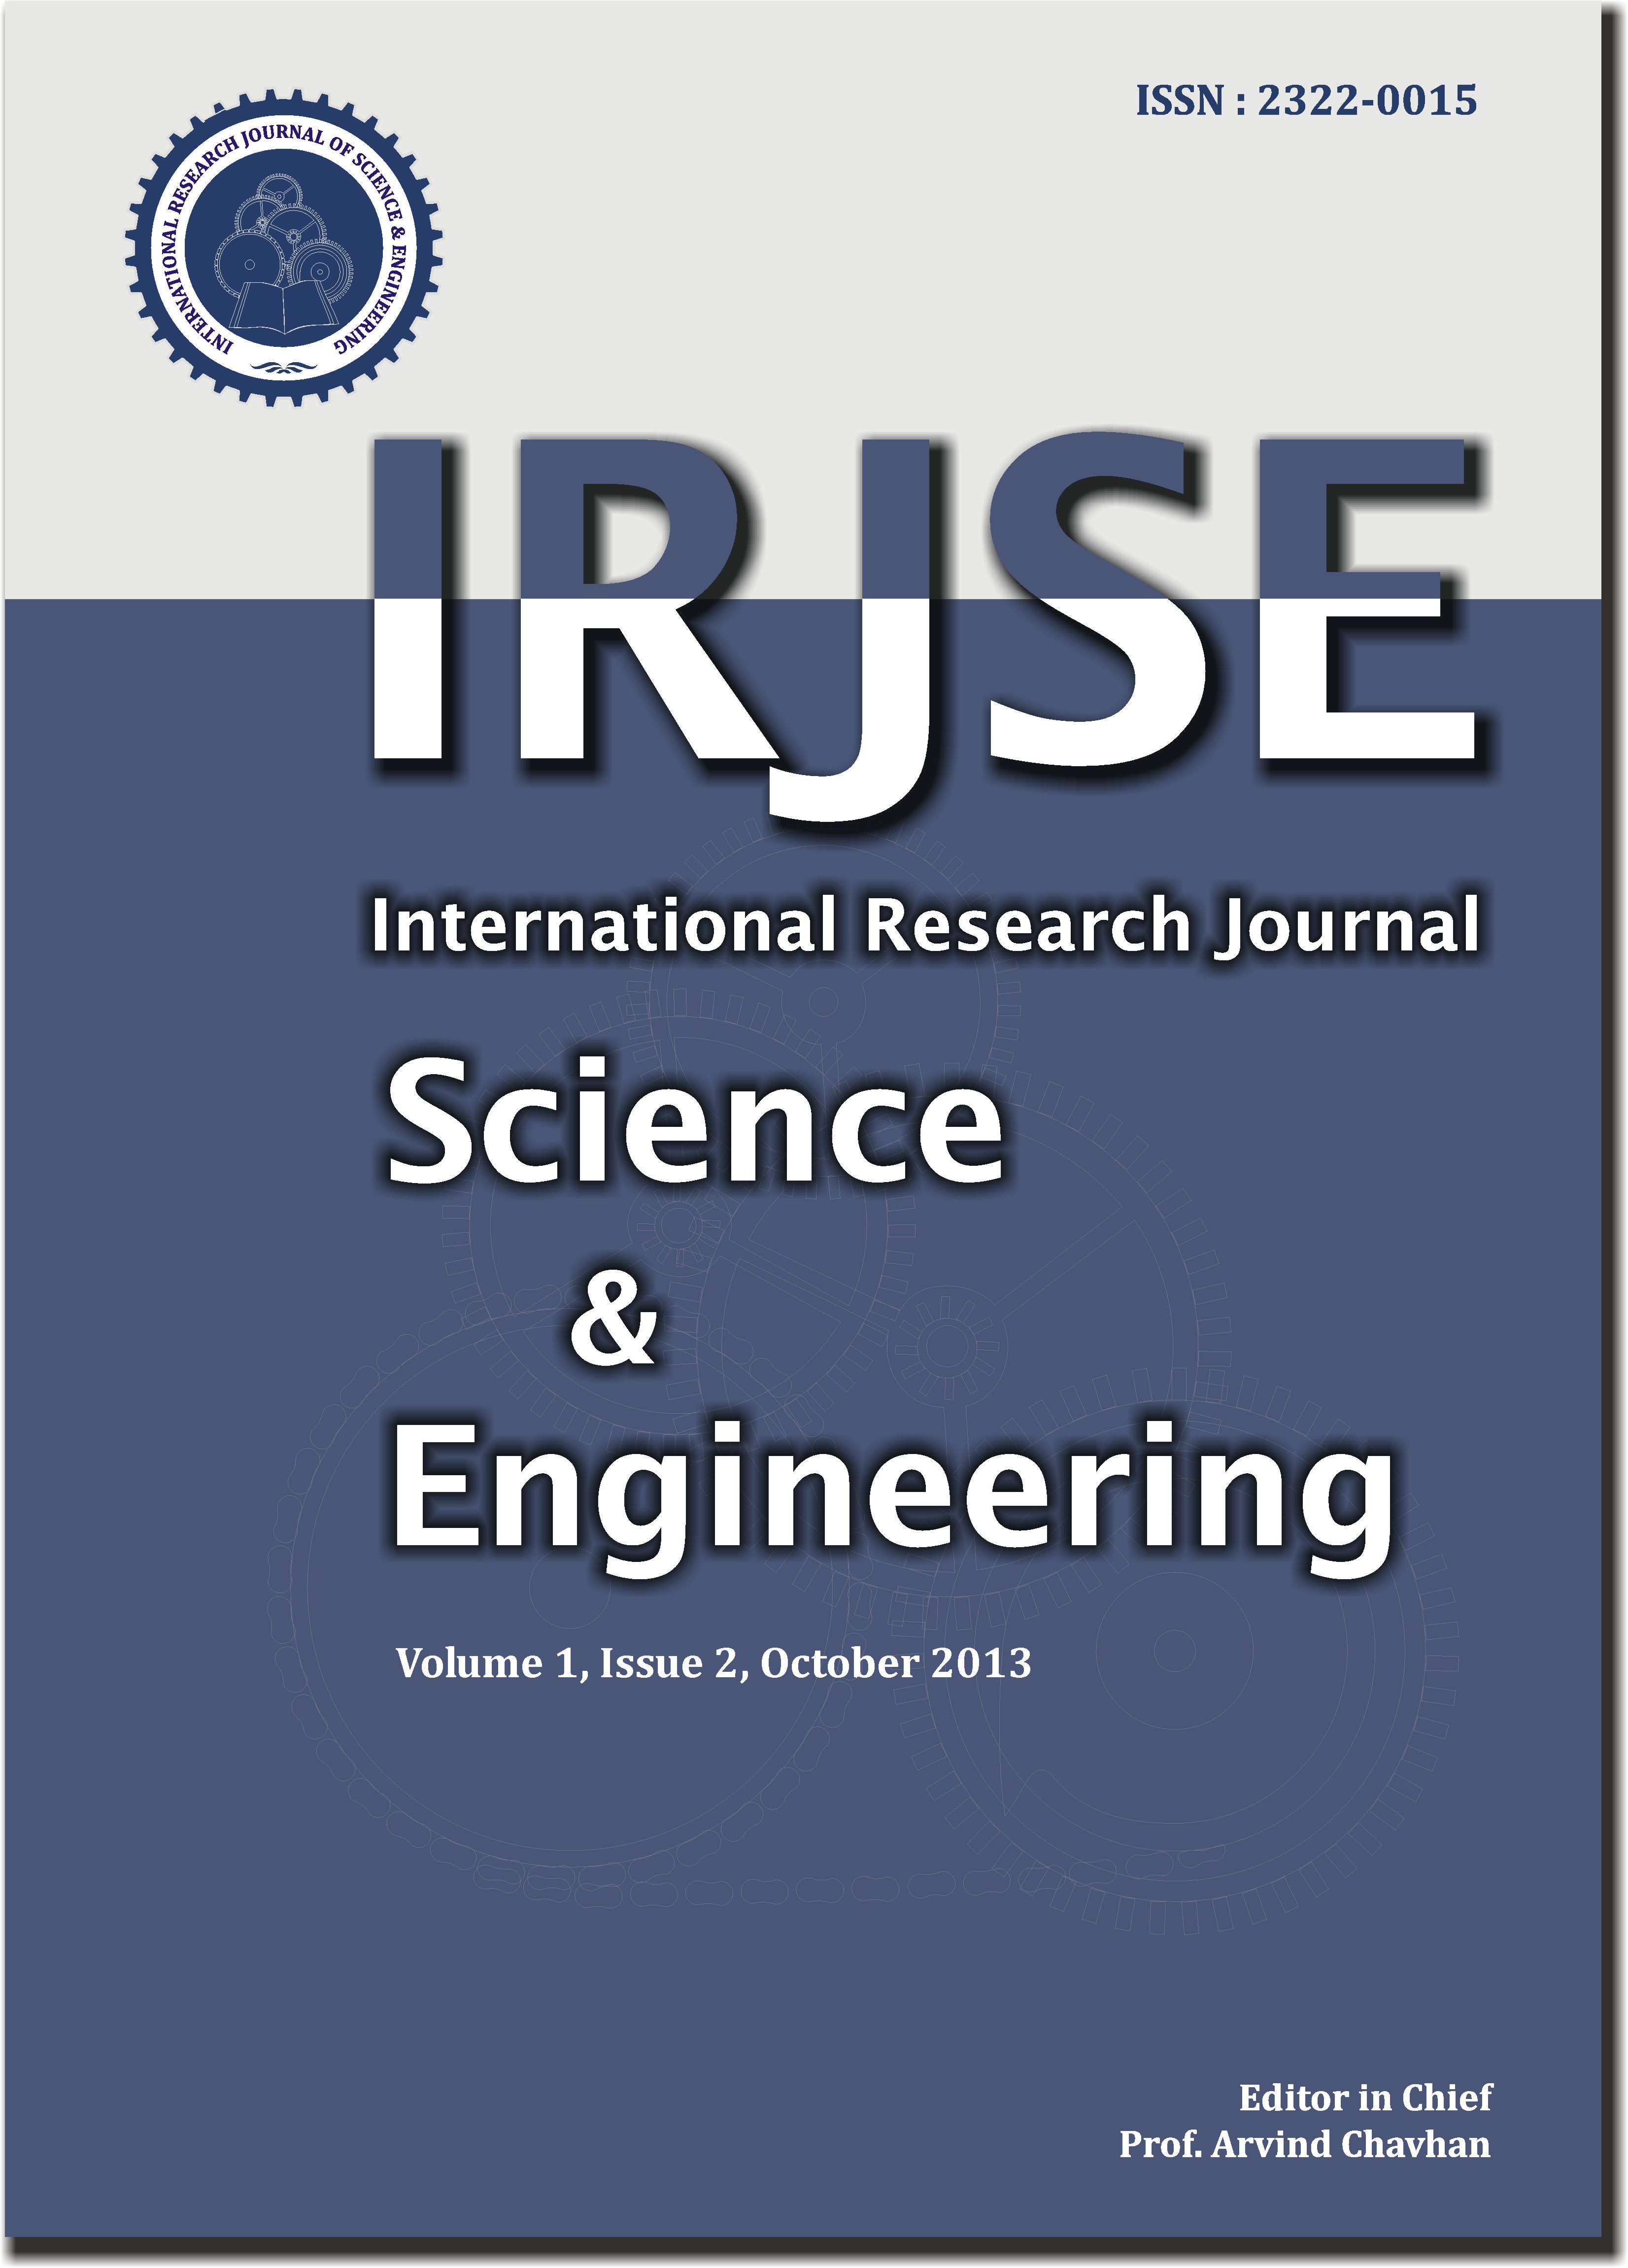 					View Vol. 1 No. 2 (2013): International Research Journal of Science and Engineering
				